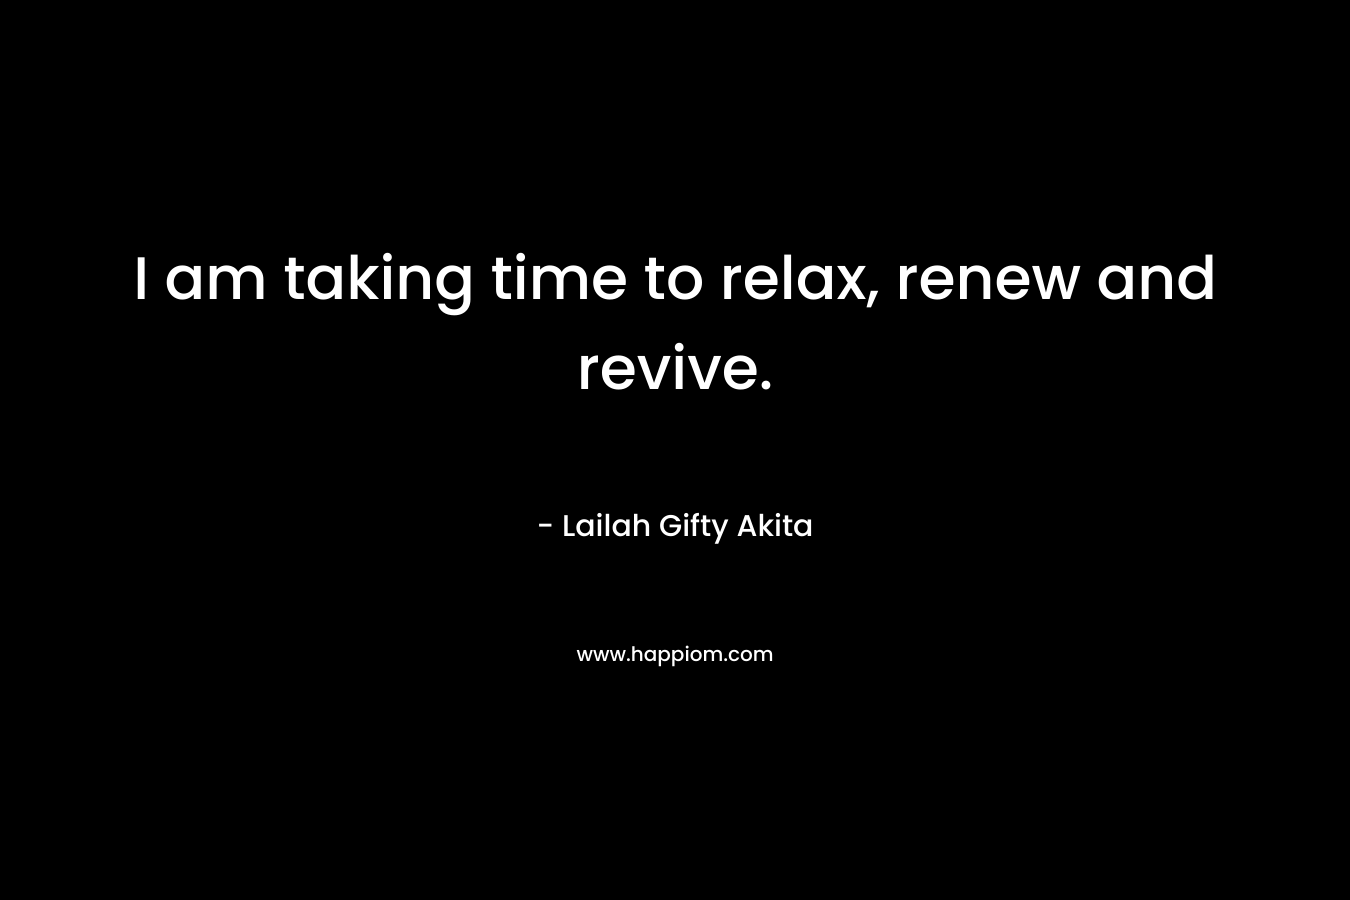 I am taking time to relax, renew and revive. – Lailah Gifty Akita